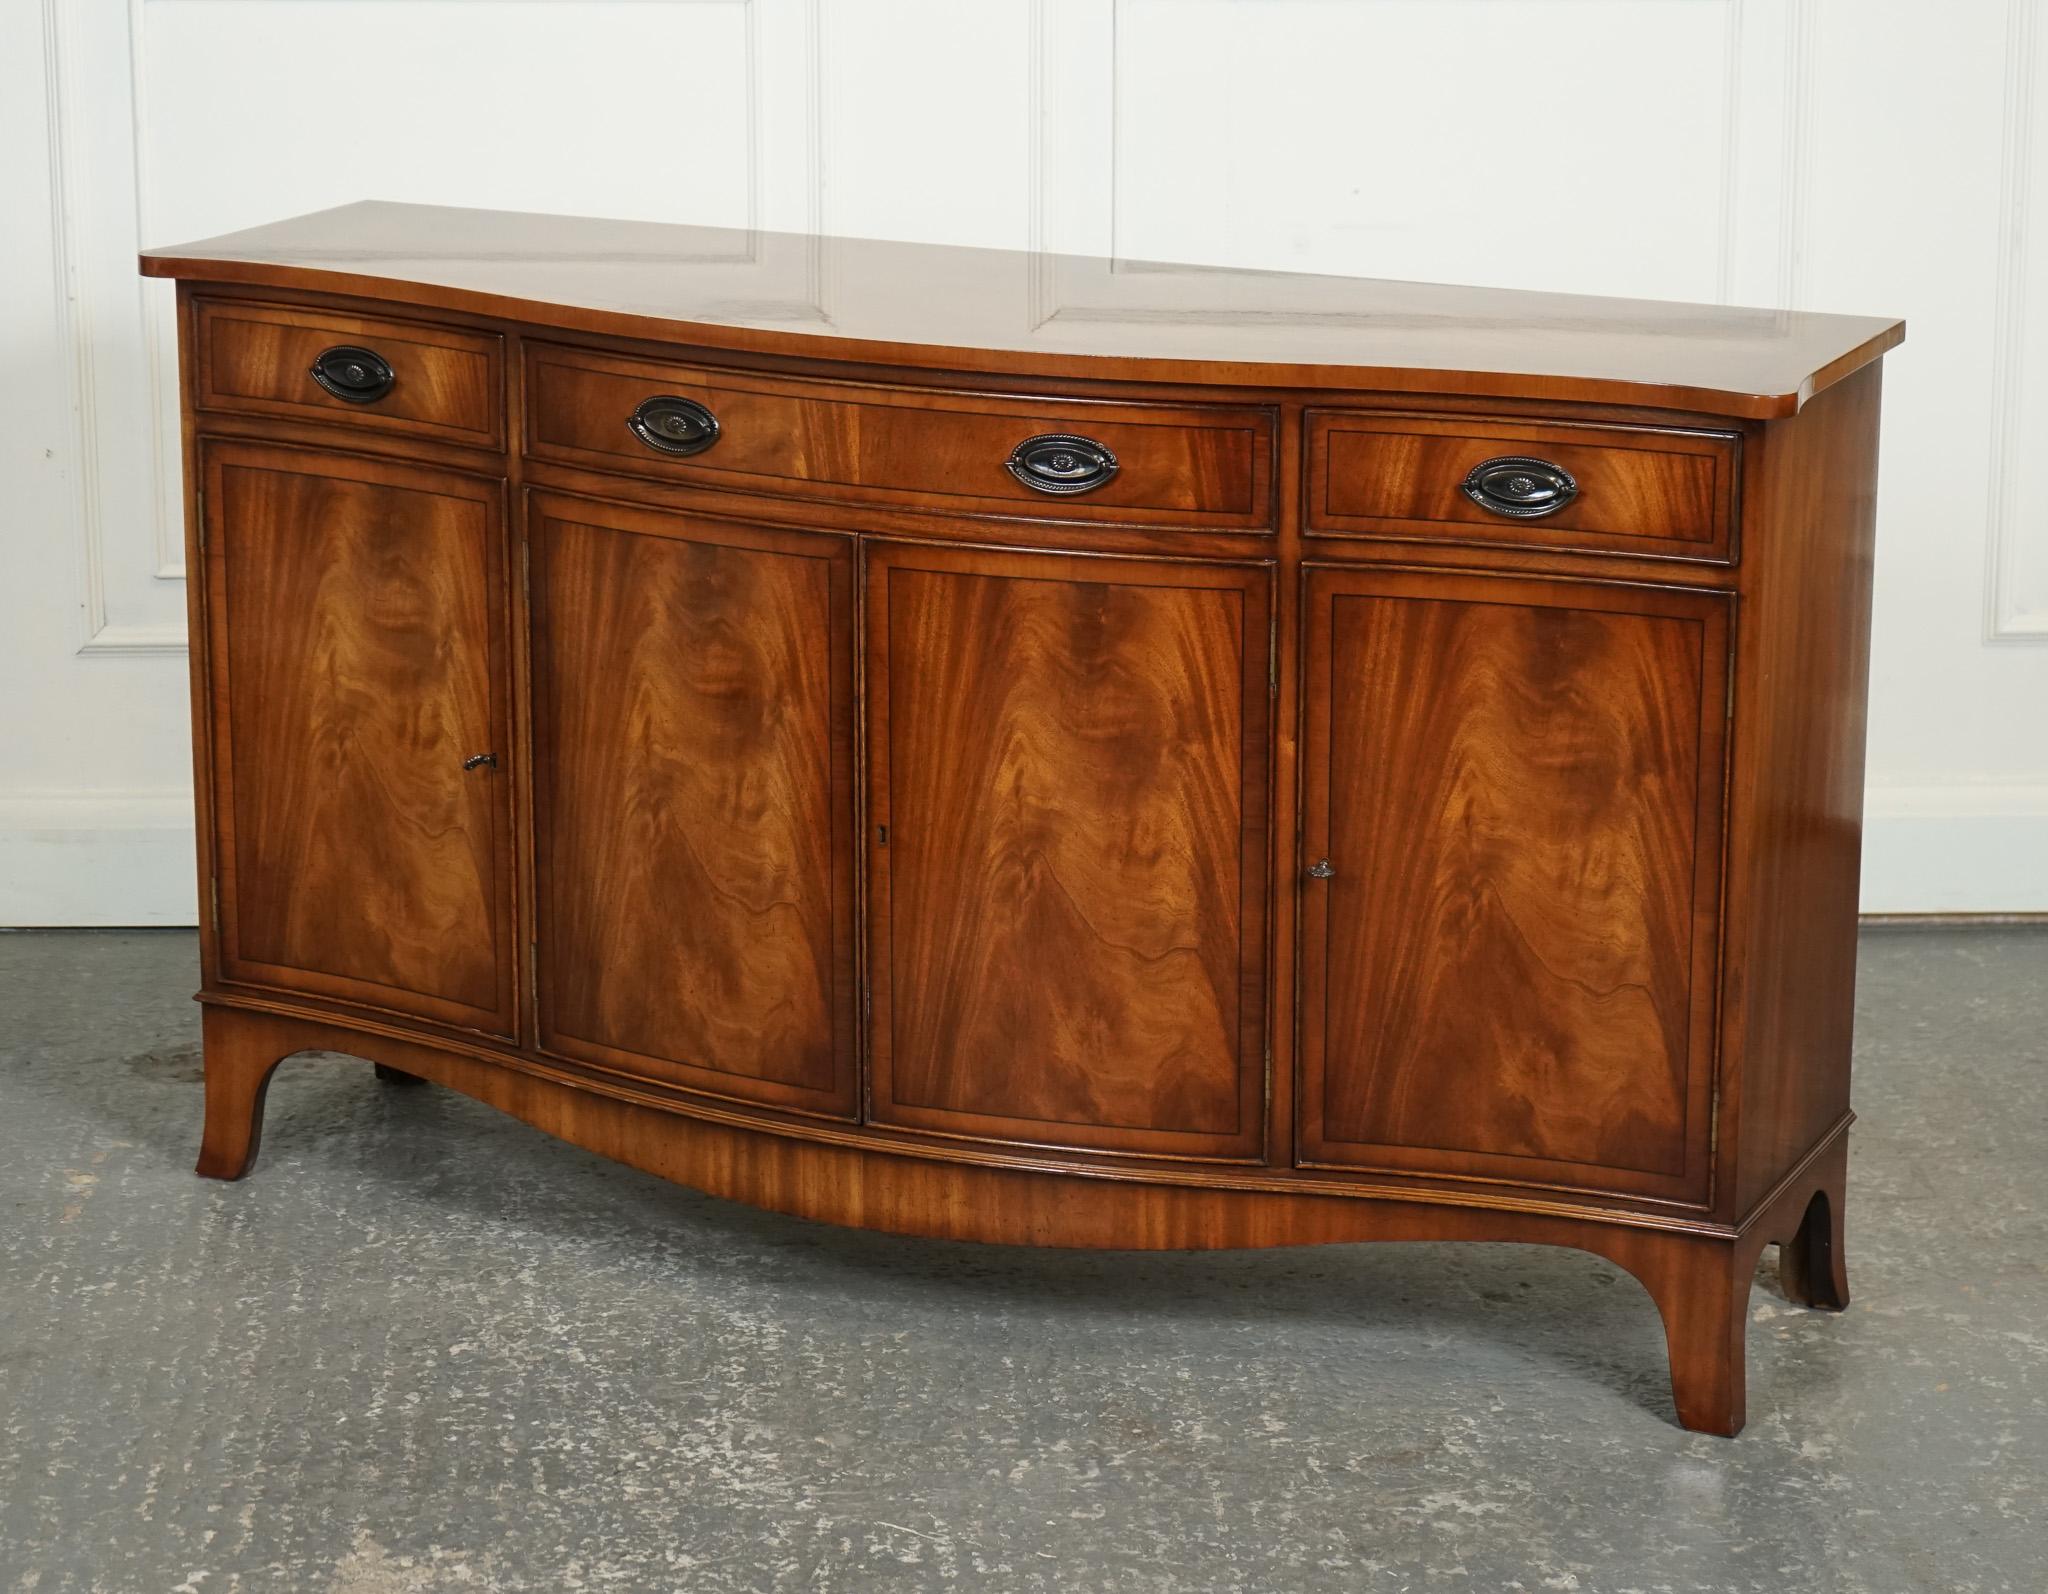 
We are delighted to offer for sale this Lovely Bevan Funnel Walnut Sideboard.

A Bevan Funnell Serpentine Georgian Style Bow Fronted Sideboard is a stunning and versatile piece of furniture that combines traditional design with practical storage